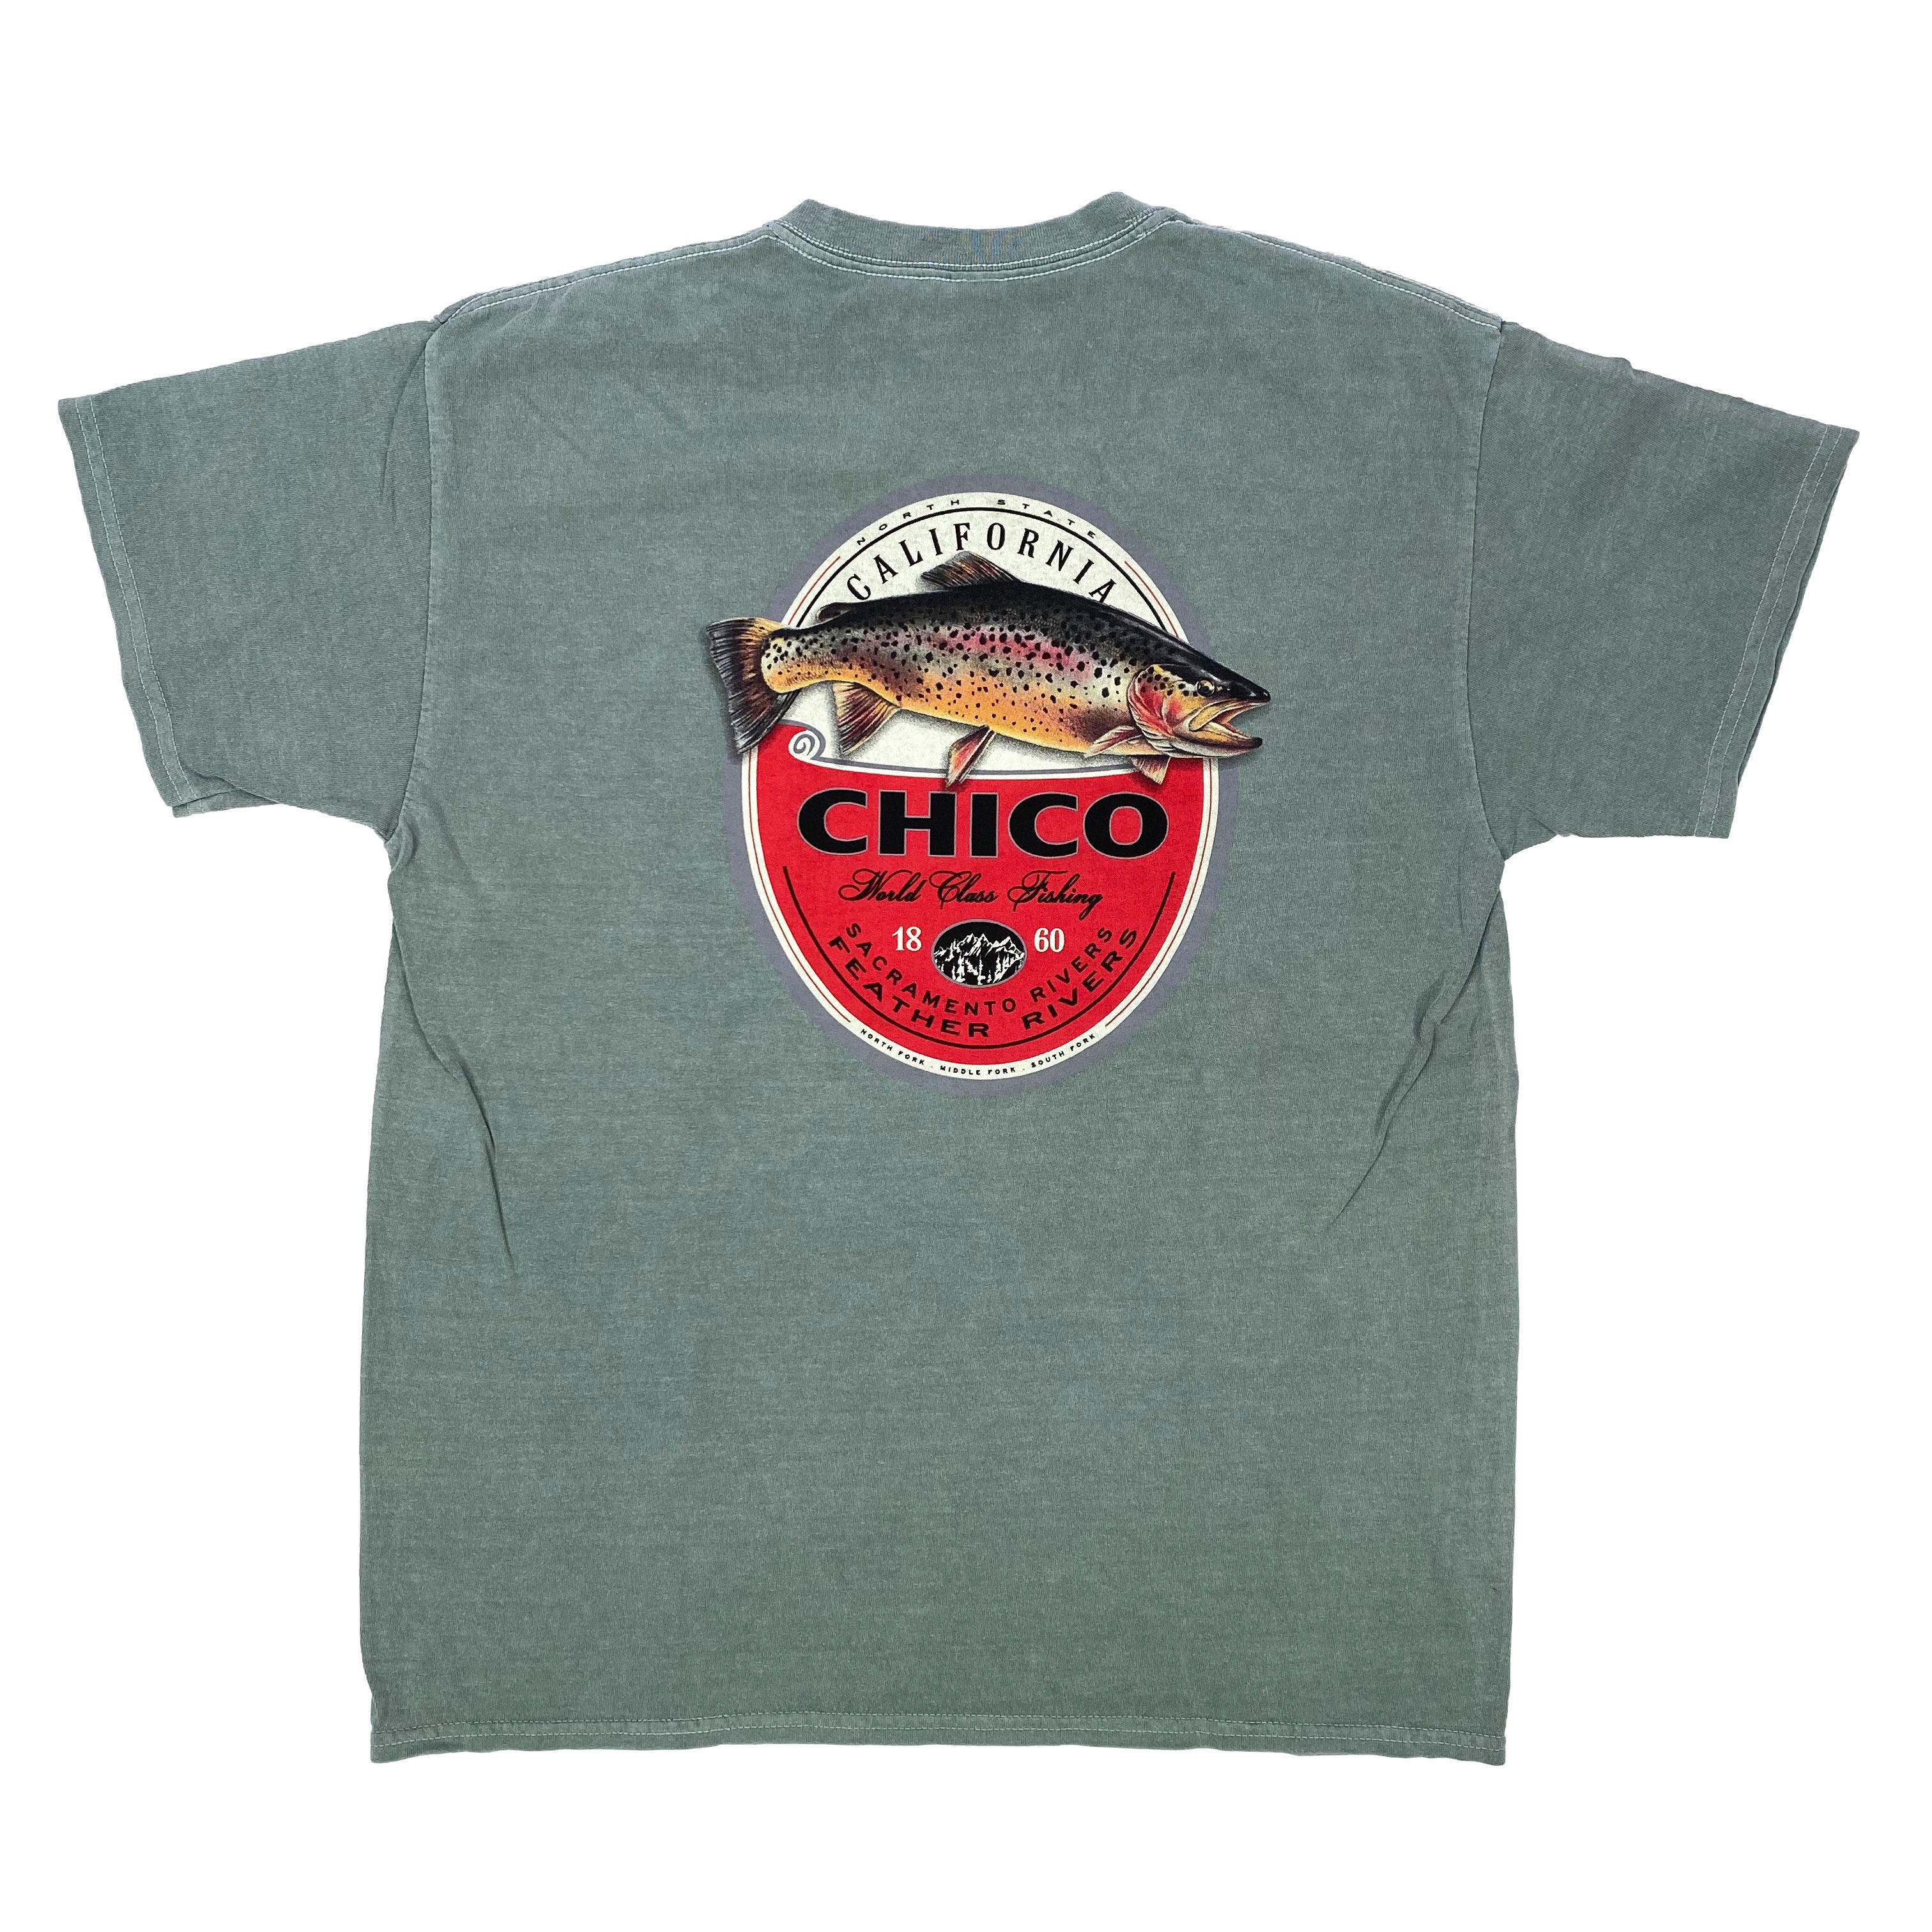 Femorial Trout - Chico T-shirt Sage S  3241088.01